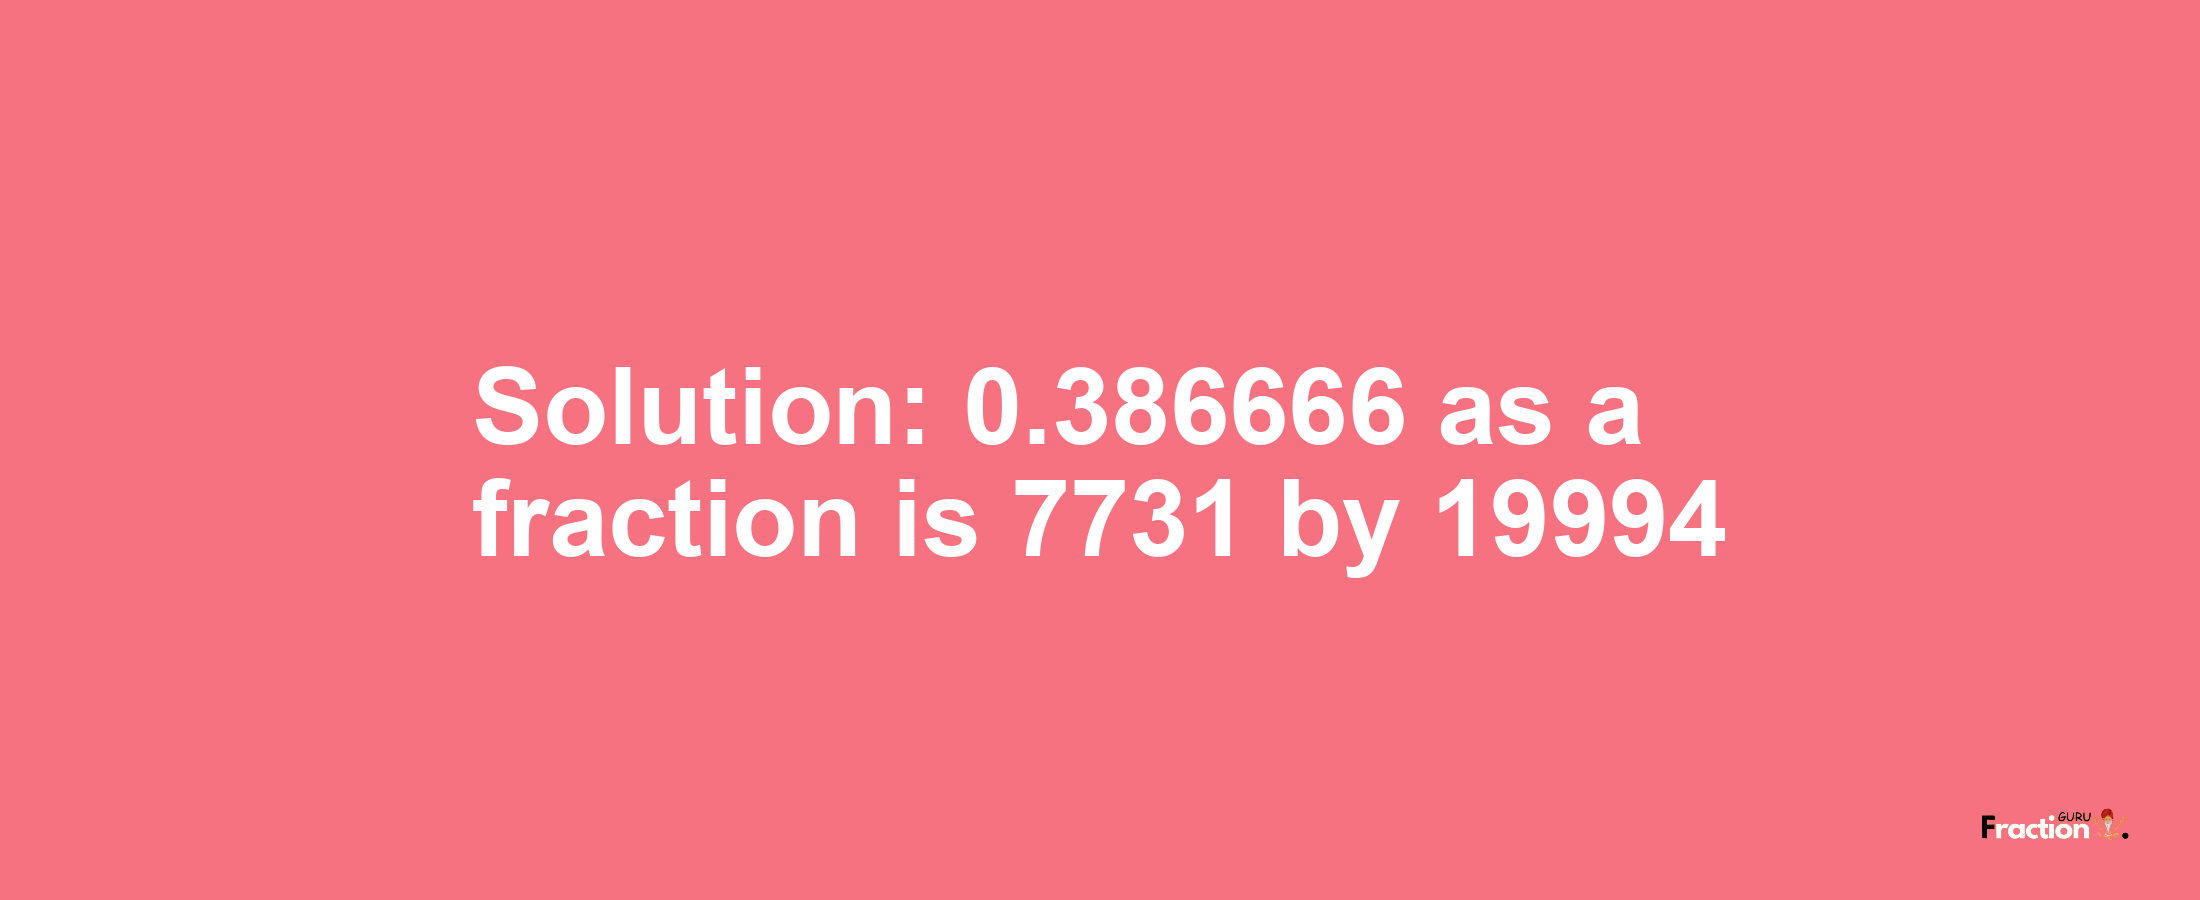 Solution:0.386666 as a fraction is 7731/19994